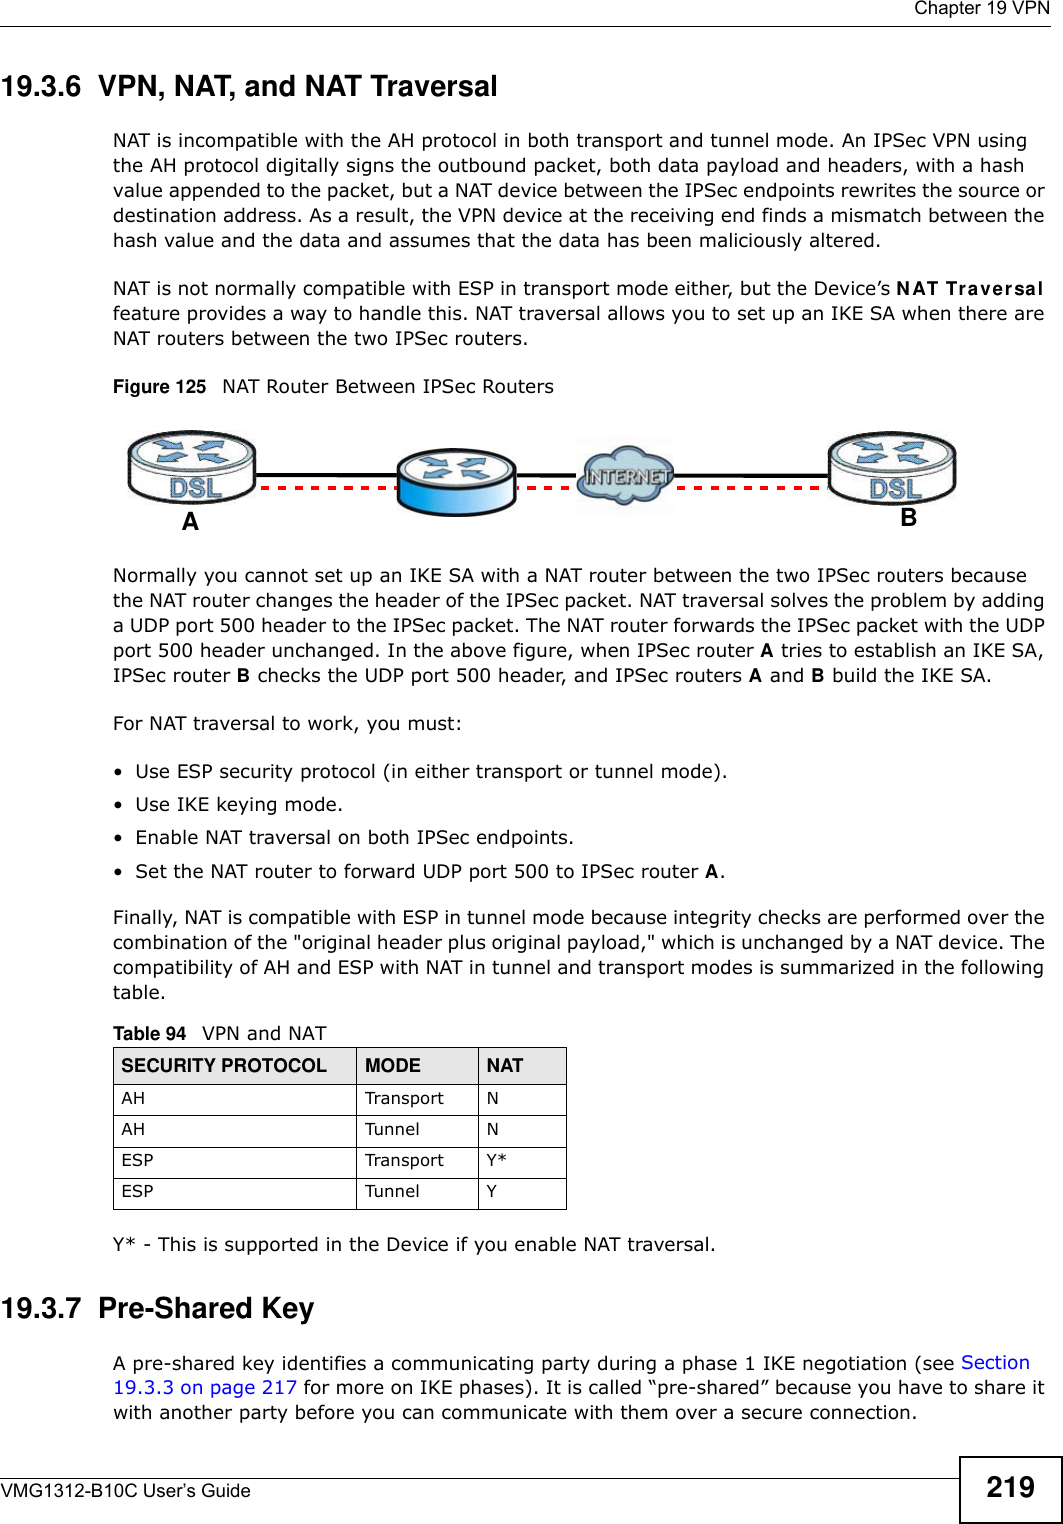  Chapter 19 VPNVMG1312-B10C User’s Guide 21919.3.6  VPN, NAT, and NAT TraversalNAT is incompatible with the AH protocol in both transport and tunnel mode. An IPSec VPN using the AH protocol digitally signs the outbound packet, both data payload and headers, with a hash value appended to the packet, but a NAT device between the IPSec endpoints rewrites the source or destination address. As a result, the VPN device at the receiving end finds a mismatch between the hash value and the data and assumes that the data has been maliciously altered.NAT is not normally compatible with ESP in transport mode either, but the Device’s NAT Tra ve r sa l feature provides a way to handle this. NAT traversal allows you to set up an IKE SA when there are NAT routers between the two IPSec routers.Figure 125   NAT Router Between IPSec RoutersNormally you cannot set up an IKE SA with a NAT router between the two IPSec routers because the NAT router changes the header of the IPSec packet. NAT traversal solves the problem by adding a UDP port 500 header to the IPSec packet. The NAT router forwards the IPSec packet with the UDP port 500 header unchanged. In the above figure, when IPSec router A tries to establish an IKE SA, IPSec router B checks the UDP port 500 header, and IPSec routers A and B build the IKE SA.For NAT traversal to work, you must:• Use ESP security protocol (in either transport or tunnel mode).•Use IKE keying mode.• Enable NAT traversal on both IPSec endpoints.• Set the NAT router to forward UDP port 500 to IPSec router A.Finally, NAT is compatible with ESP in tunnel mode because integrity checks are performed over the combination of the &quot;original header plus original payload,&quot; which is unchanged by a NAT device. The compatibility of AH and ESP with NAT in tunnel and transport modes is summarized in the following table.Y* - This is supported in the Device if you enable NAT traversal.19.3.7  Pre-Shared KeyA pre-shared key identifies a communicating party during a phase 1 IKE negotiation (see Section 19.3.3 on page 217 for more on IKE phases). It is called “pre-shared” because you have to share it with another party before you can communicate with them over a secure connection.Table 94   VPN and NATSECURITY PROTOCOL MODE NATAH Transport NAH Tunnel NESP Transport Y*ESP Tunnel YAB